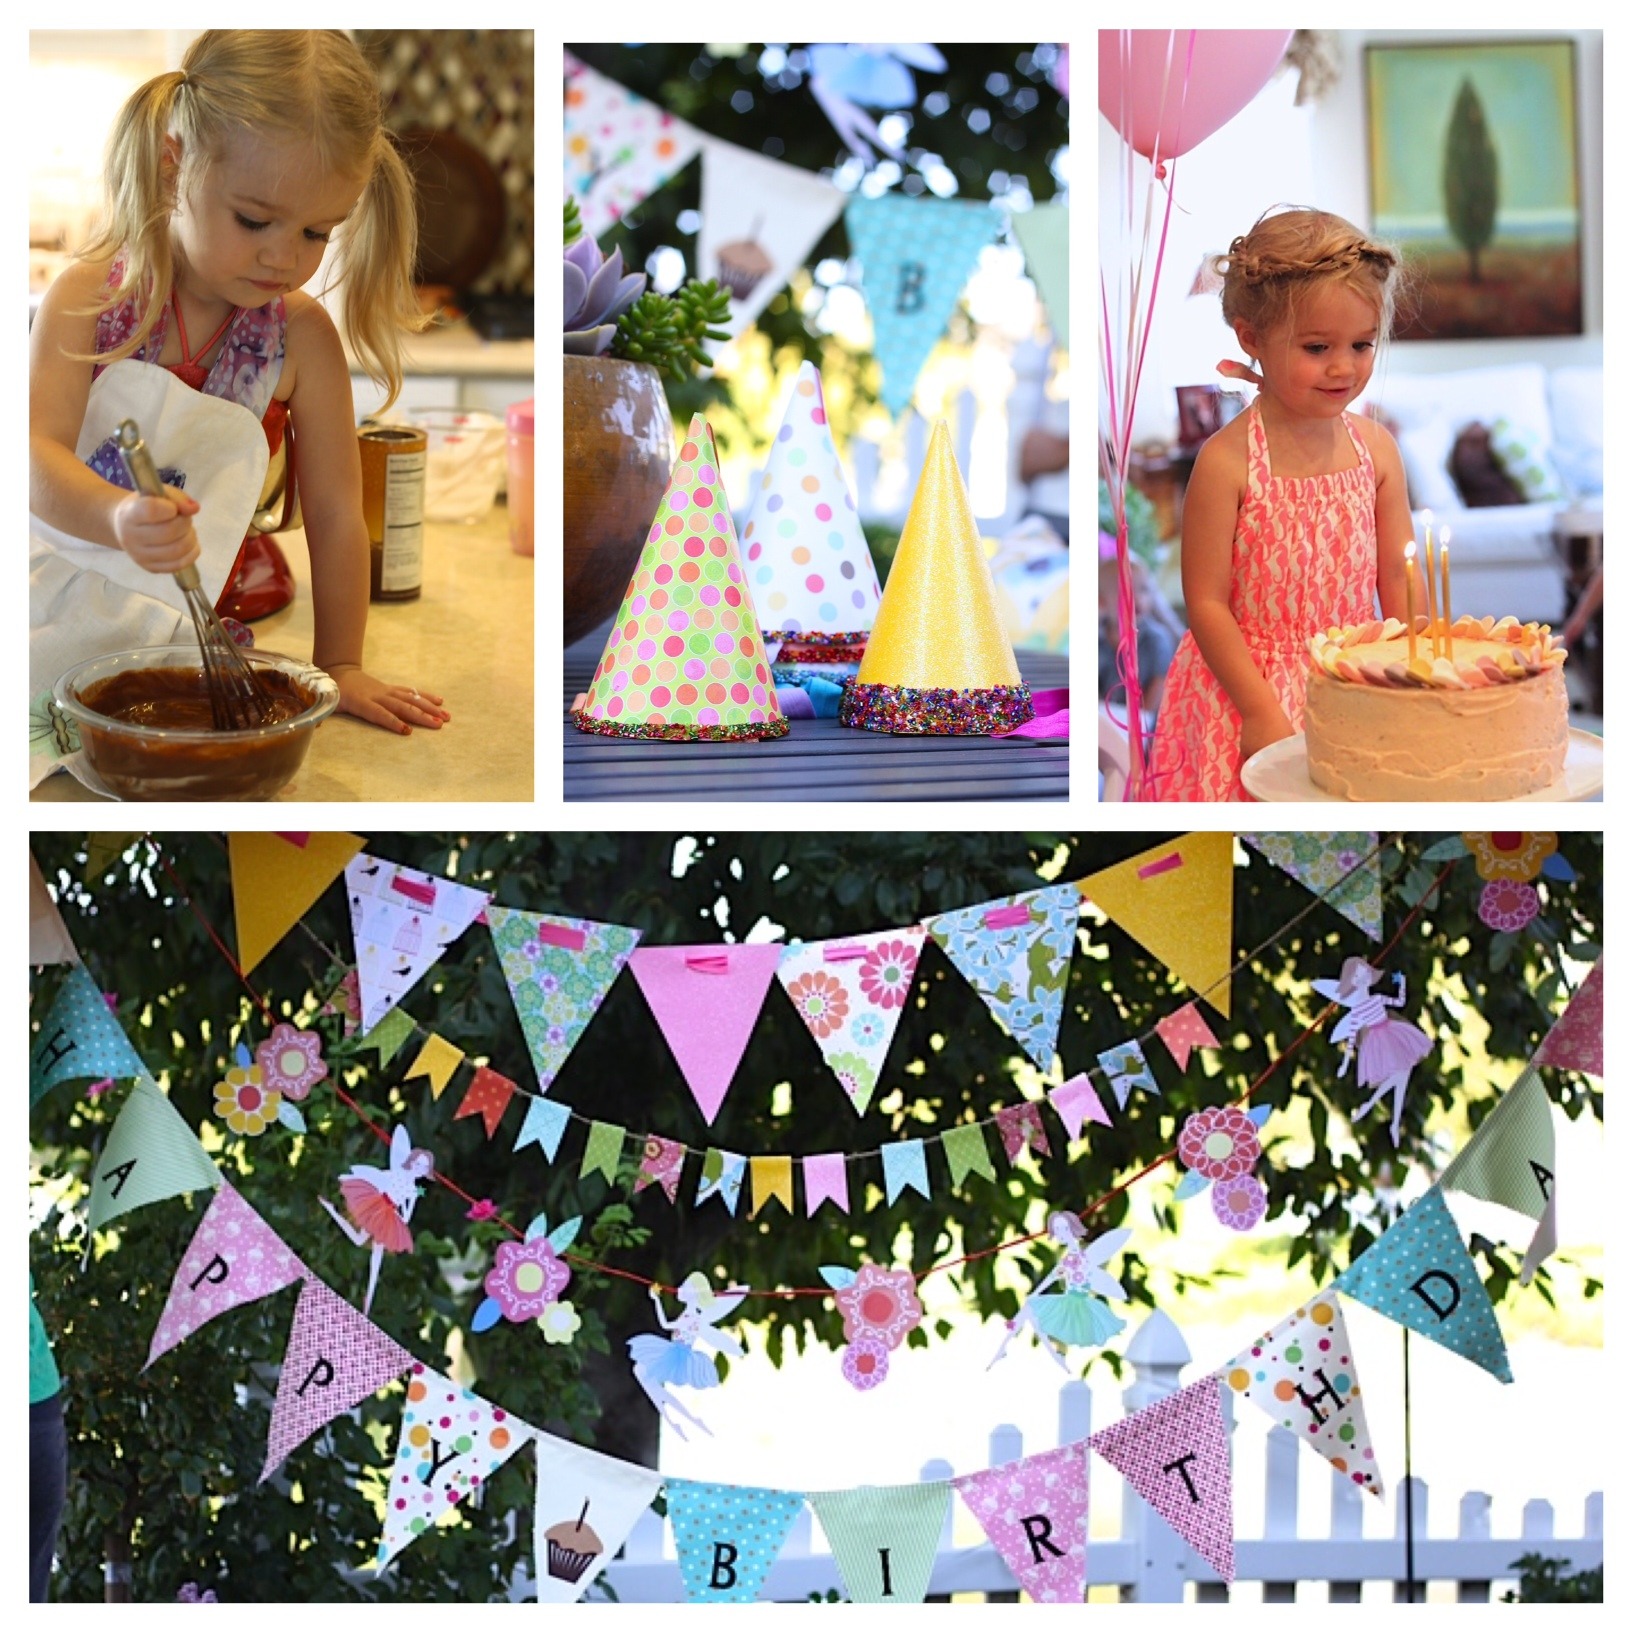 Recipes for a “Junk Food Free” Birthday Party for Kids!